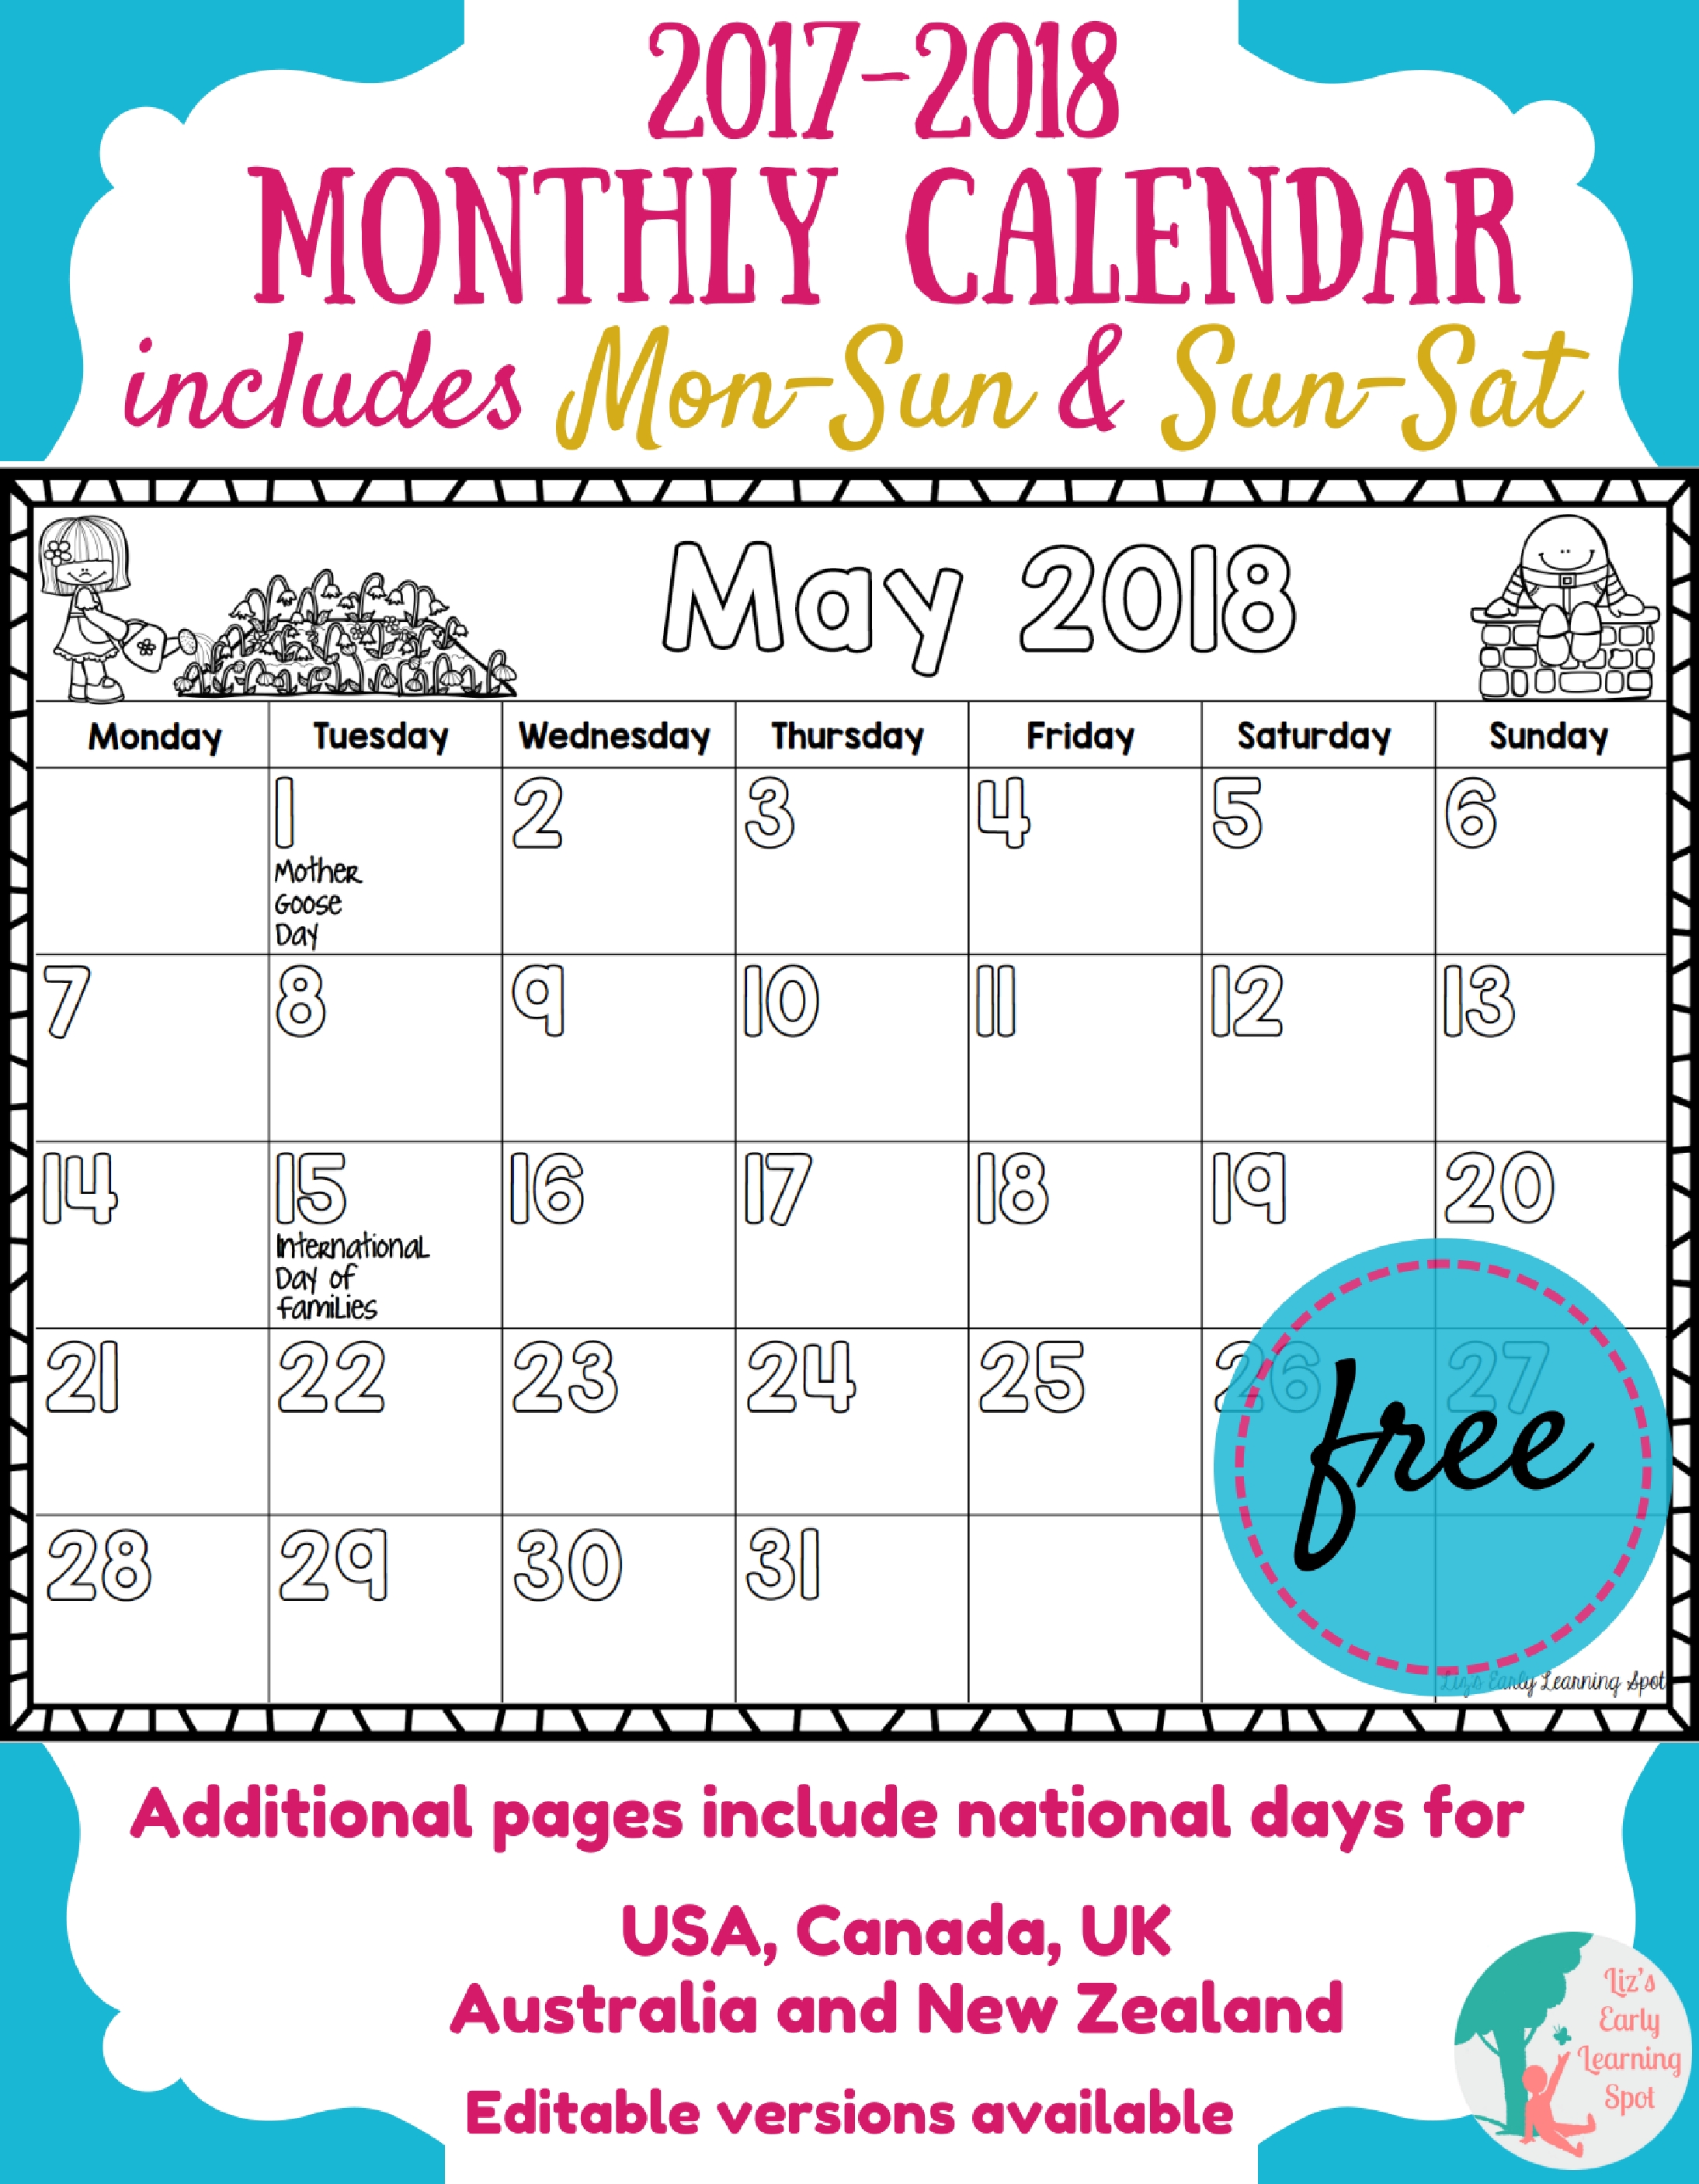 Free 2017-2018 Monthly Calendar for Kids | Liz's Early Learning Spot